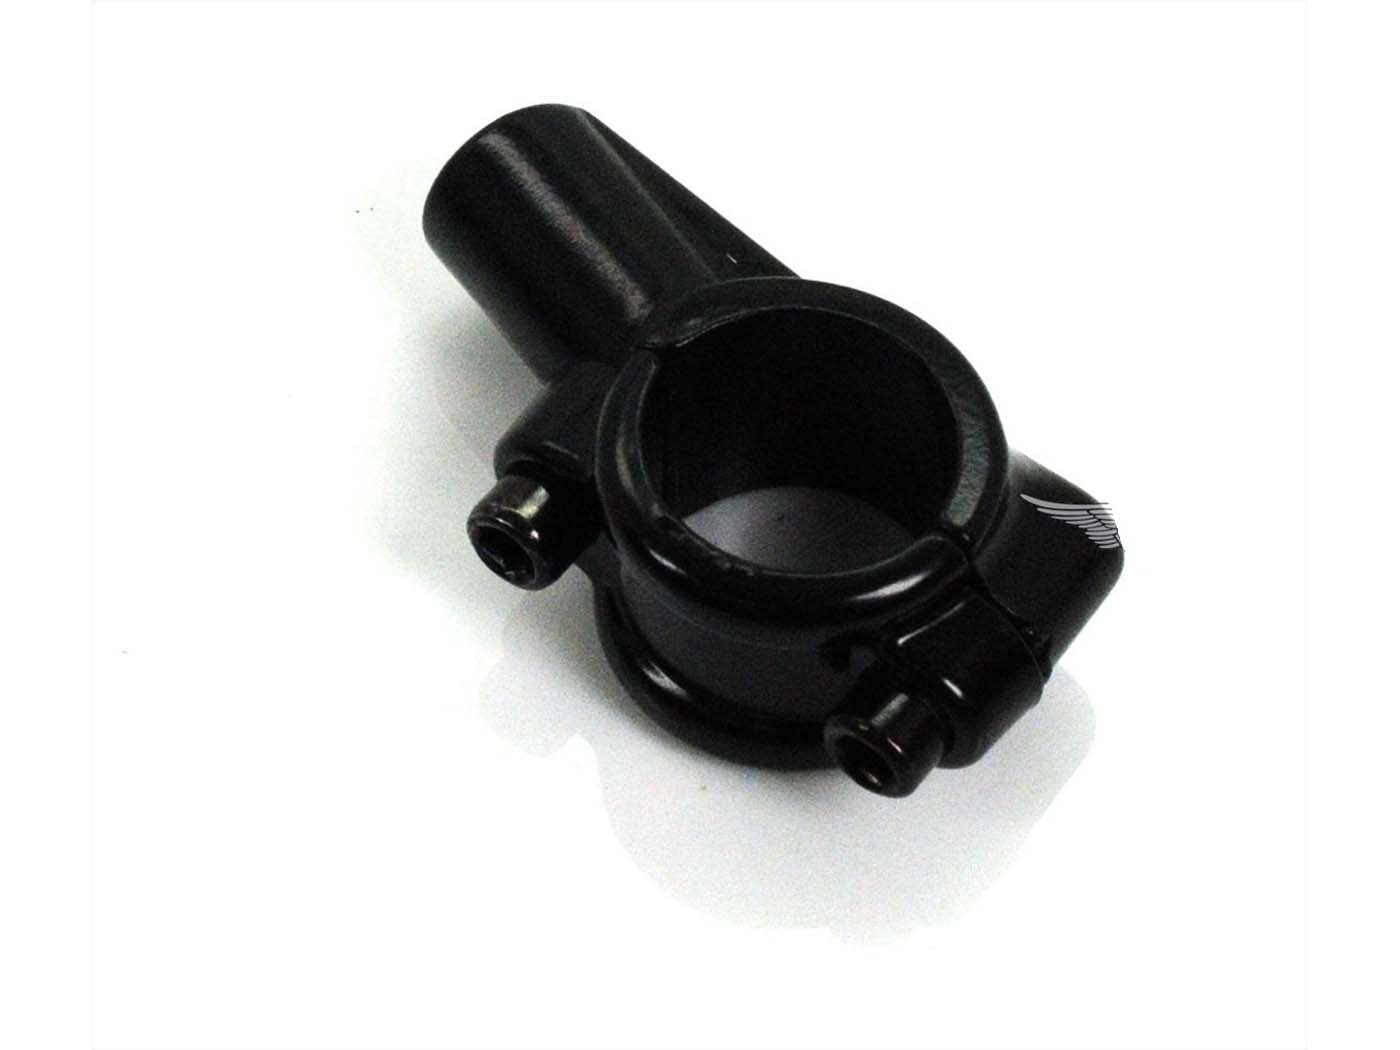 Mirror Holder For Moped, Moped, Mokick, Motorcycle